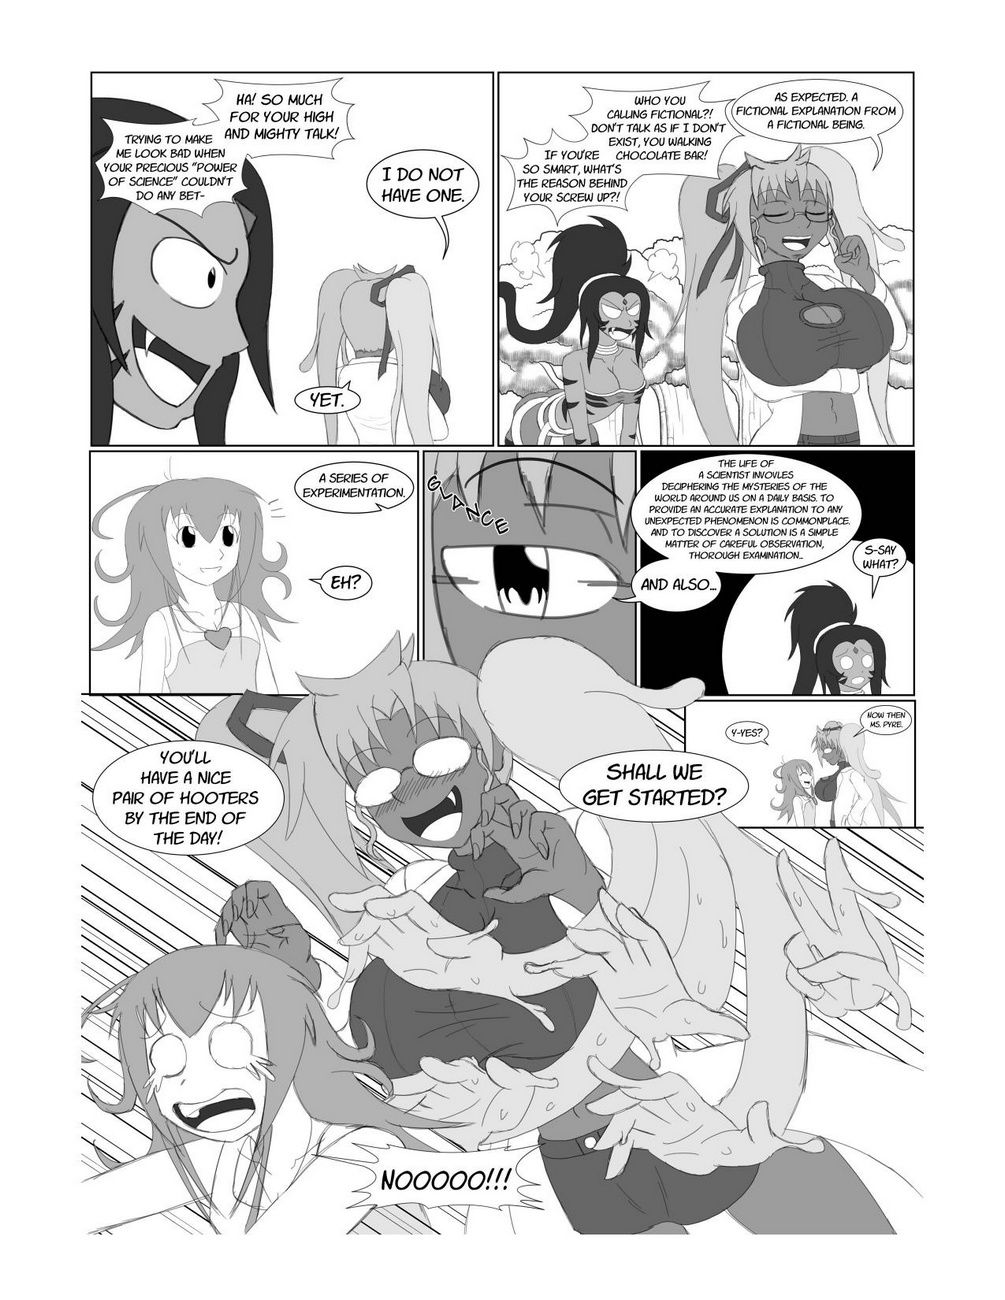 To Make A Maiden Bloom page 18